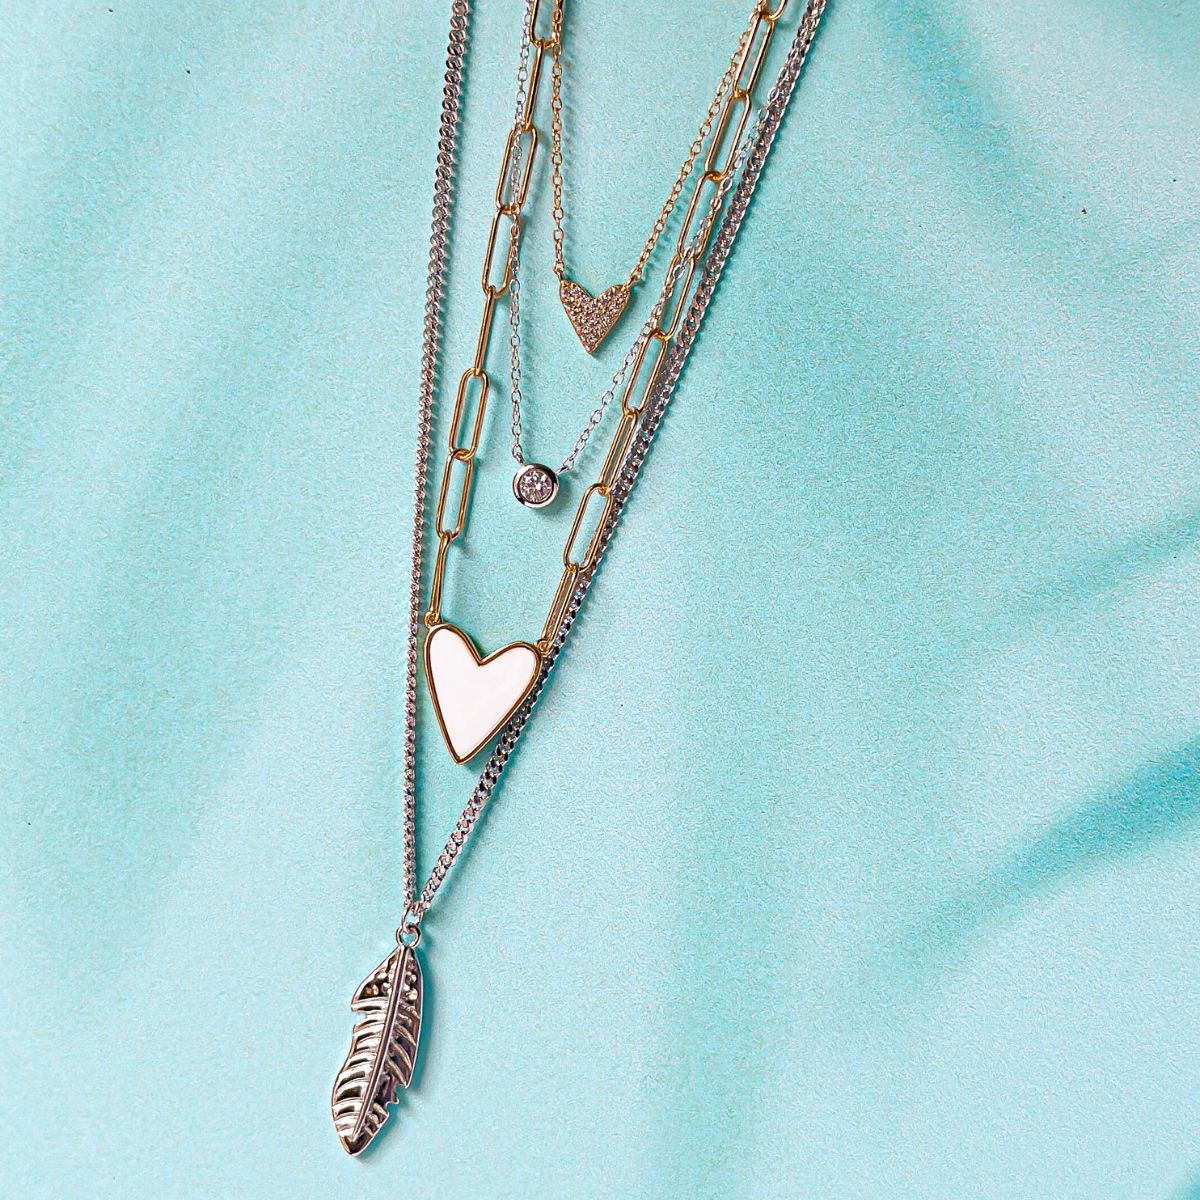 Silver sterling silver and gold layering necklaces from Featherly featuring a feather, hearts, and CZ necklace  stack